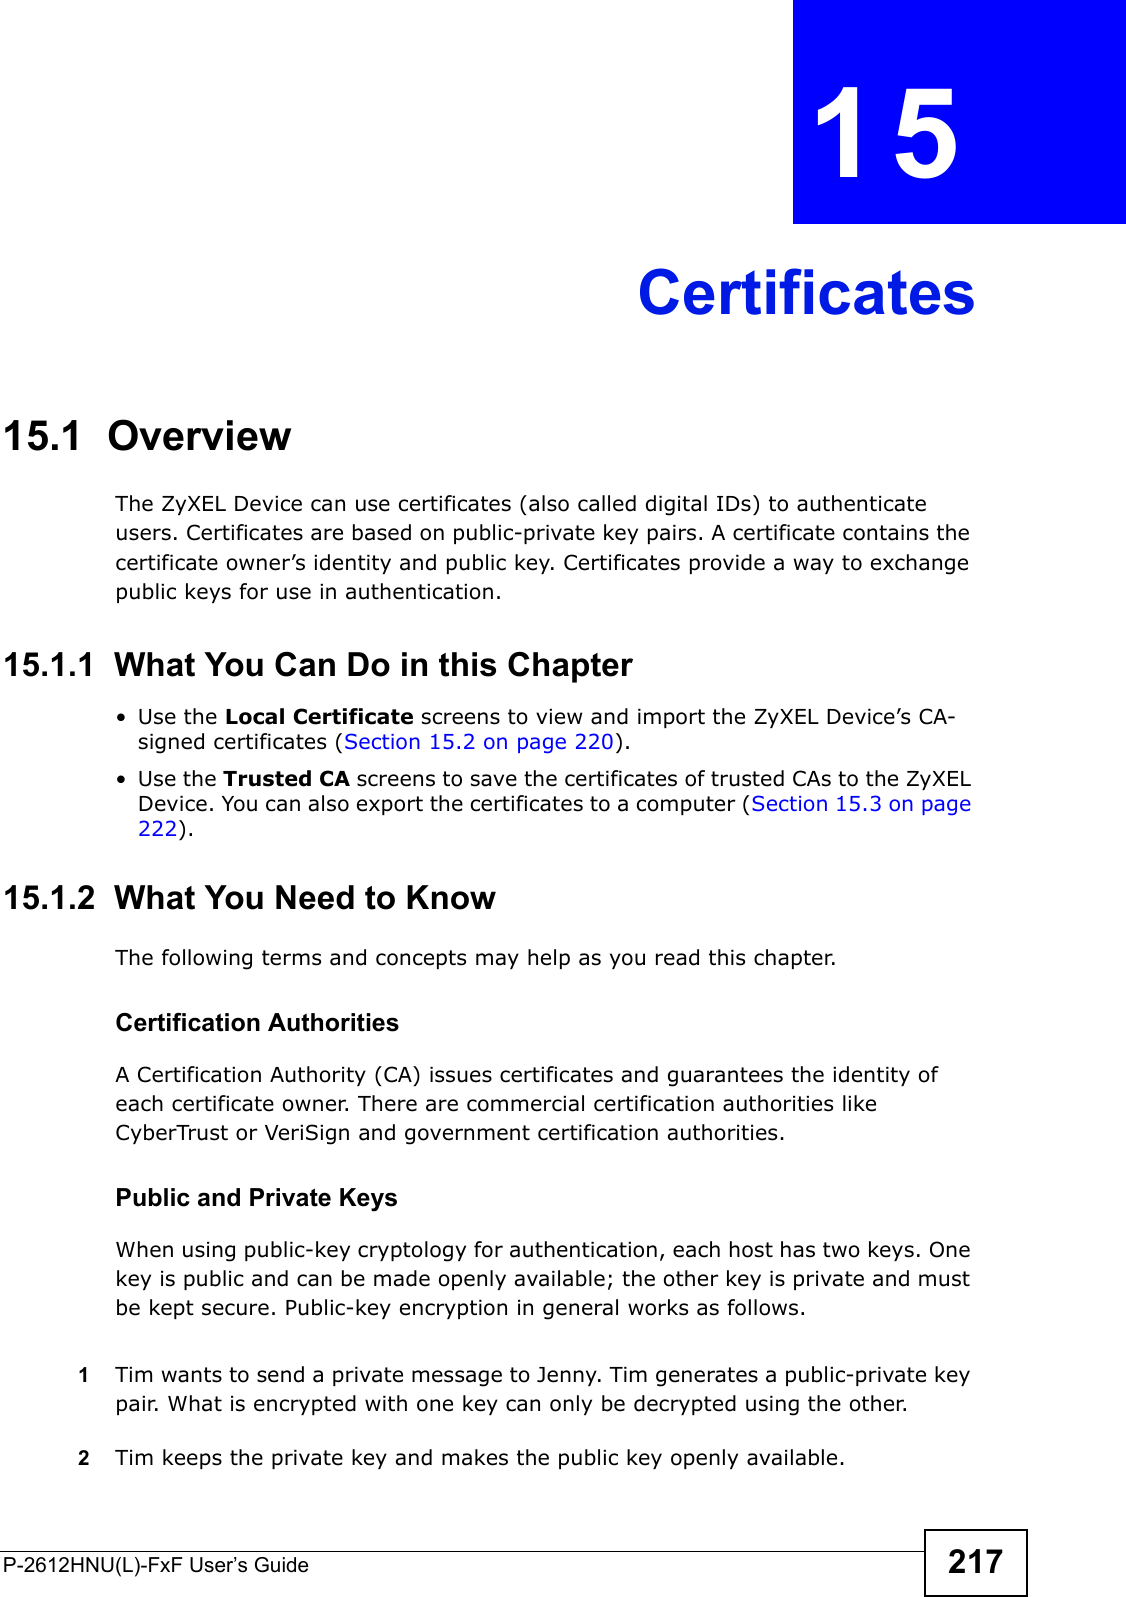 P-2612HNU(L)-FxF User’s Guide 217CHAPTER   15 Certificates15.1  OverviewThe ZyXEL Device can use certificates (also called digital IDs) to authenticate users. Certificates are based on public-private key pairs. A certificate contains the certificate owner’s identity and public key. Certificates provide a way to exchange public keys for use in authentication. 15.1.1  What You Can Do in this Chapter• Use the Local Certificate screens to view and import the ZyXEL Device’s CA-signed certificates (Section 15.2 on page 220).• Use the Trusted CA screens to save the certificates of trusted CAs to the ZyXEL Device. You can also export the certificates to a computer (Section 15.3 on page 222).15.1.2  What You Need to KnowThe following terms and concepts may help as you read this chapter.Certification AuthoritiesA Certification Authority (CA) issues certificates and guarantees the identity of each certificate owner. There are commercial certification authorities likeCyberTrust or VeriSign and government certification authorities.Public and Private KeysWhen using public-key cryptology for authentication, each host has two keys. One key is public and can be made openly available; the other key is private and must be kept secure. Public-key encryption in general works as follows. 1Tim wants to send a private message to Jenny. Tim generates a public-private key pair. What is encrypted with one key can only be decrypted using the other.2Tim keeps the private key and makes the public key openly available.